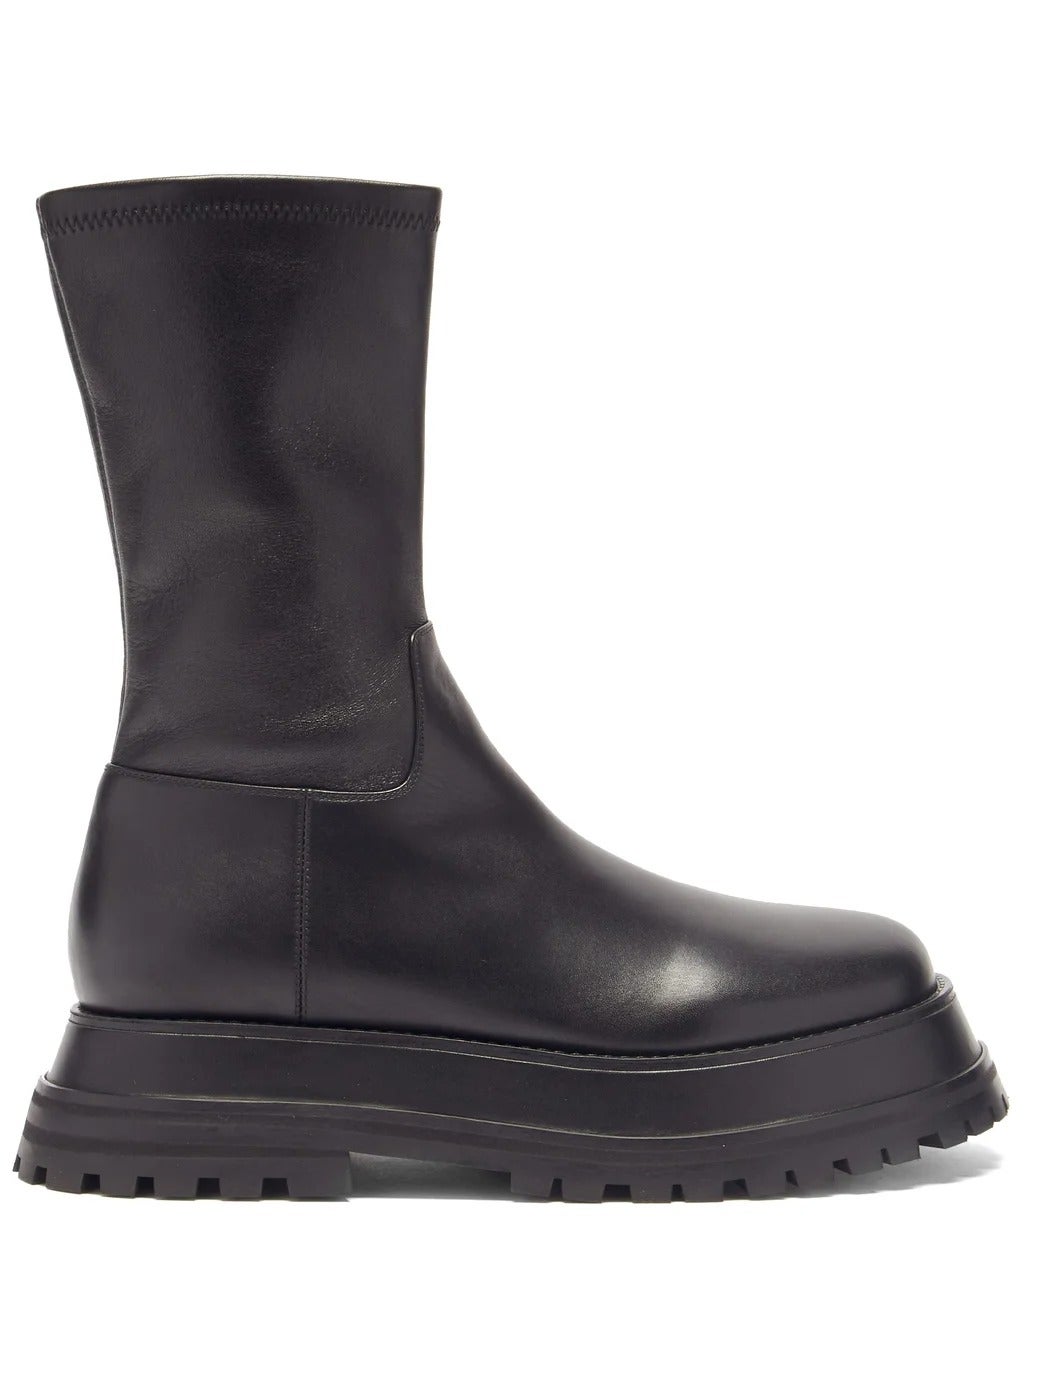 Burberry + Hurr Exaggerated Sole Leather Ankle Boots